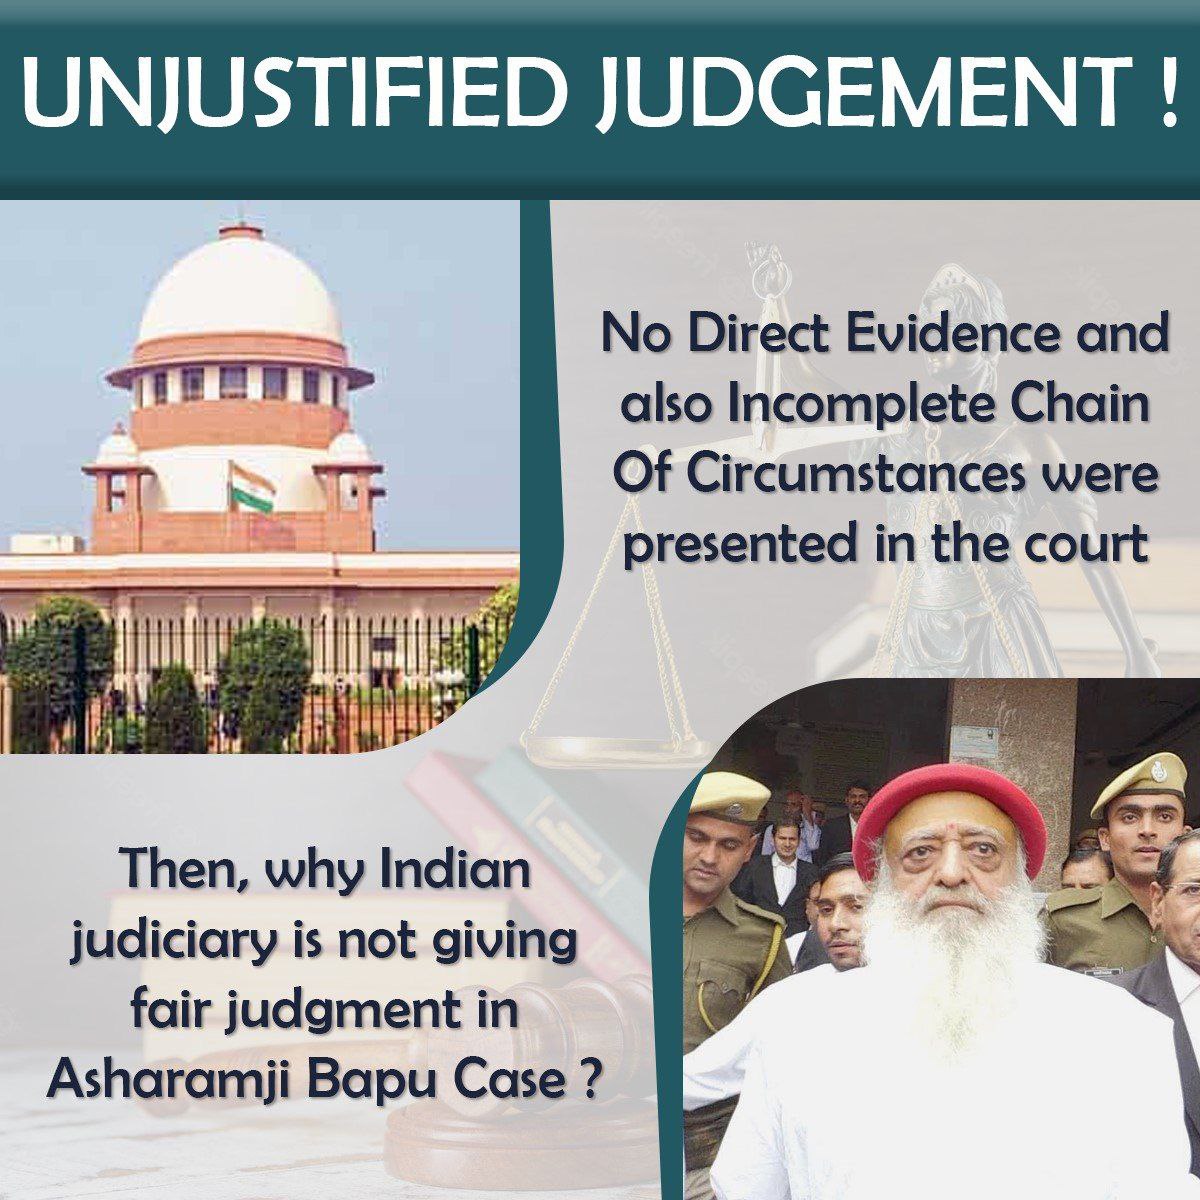 In the Asharamji Bapu Case there are many true Hidden Aspects which never been out and #FakeAllegations has been Charged to put Bapuji in Jail so we are request Seek Justice from judiciary and government To release Bapuji as per health issues and age factor bail be needed.